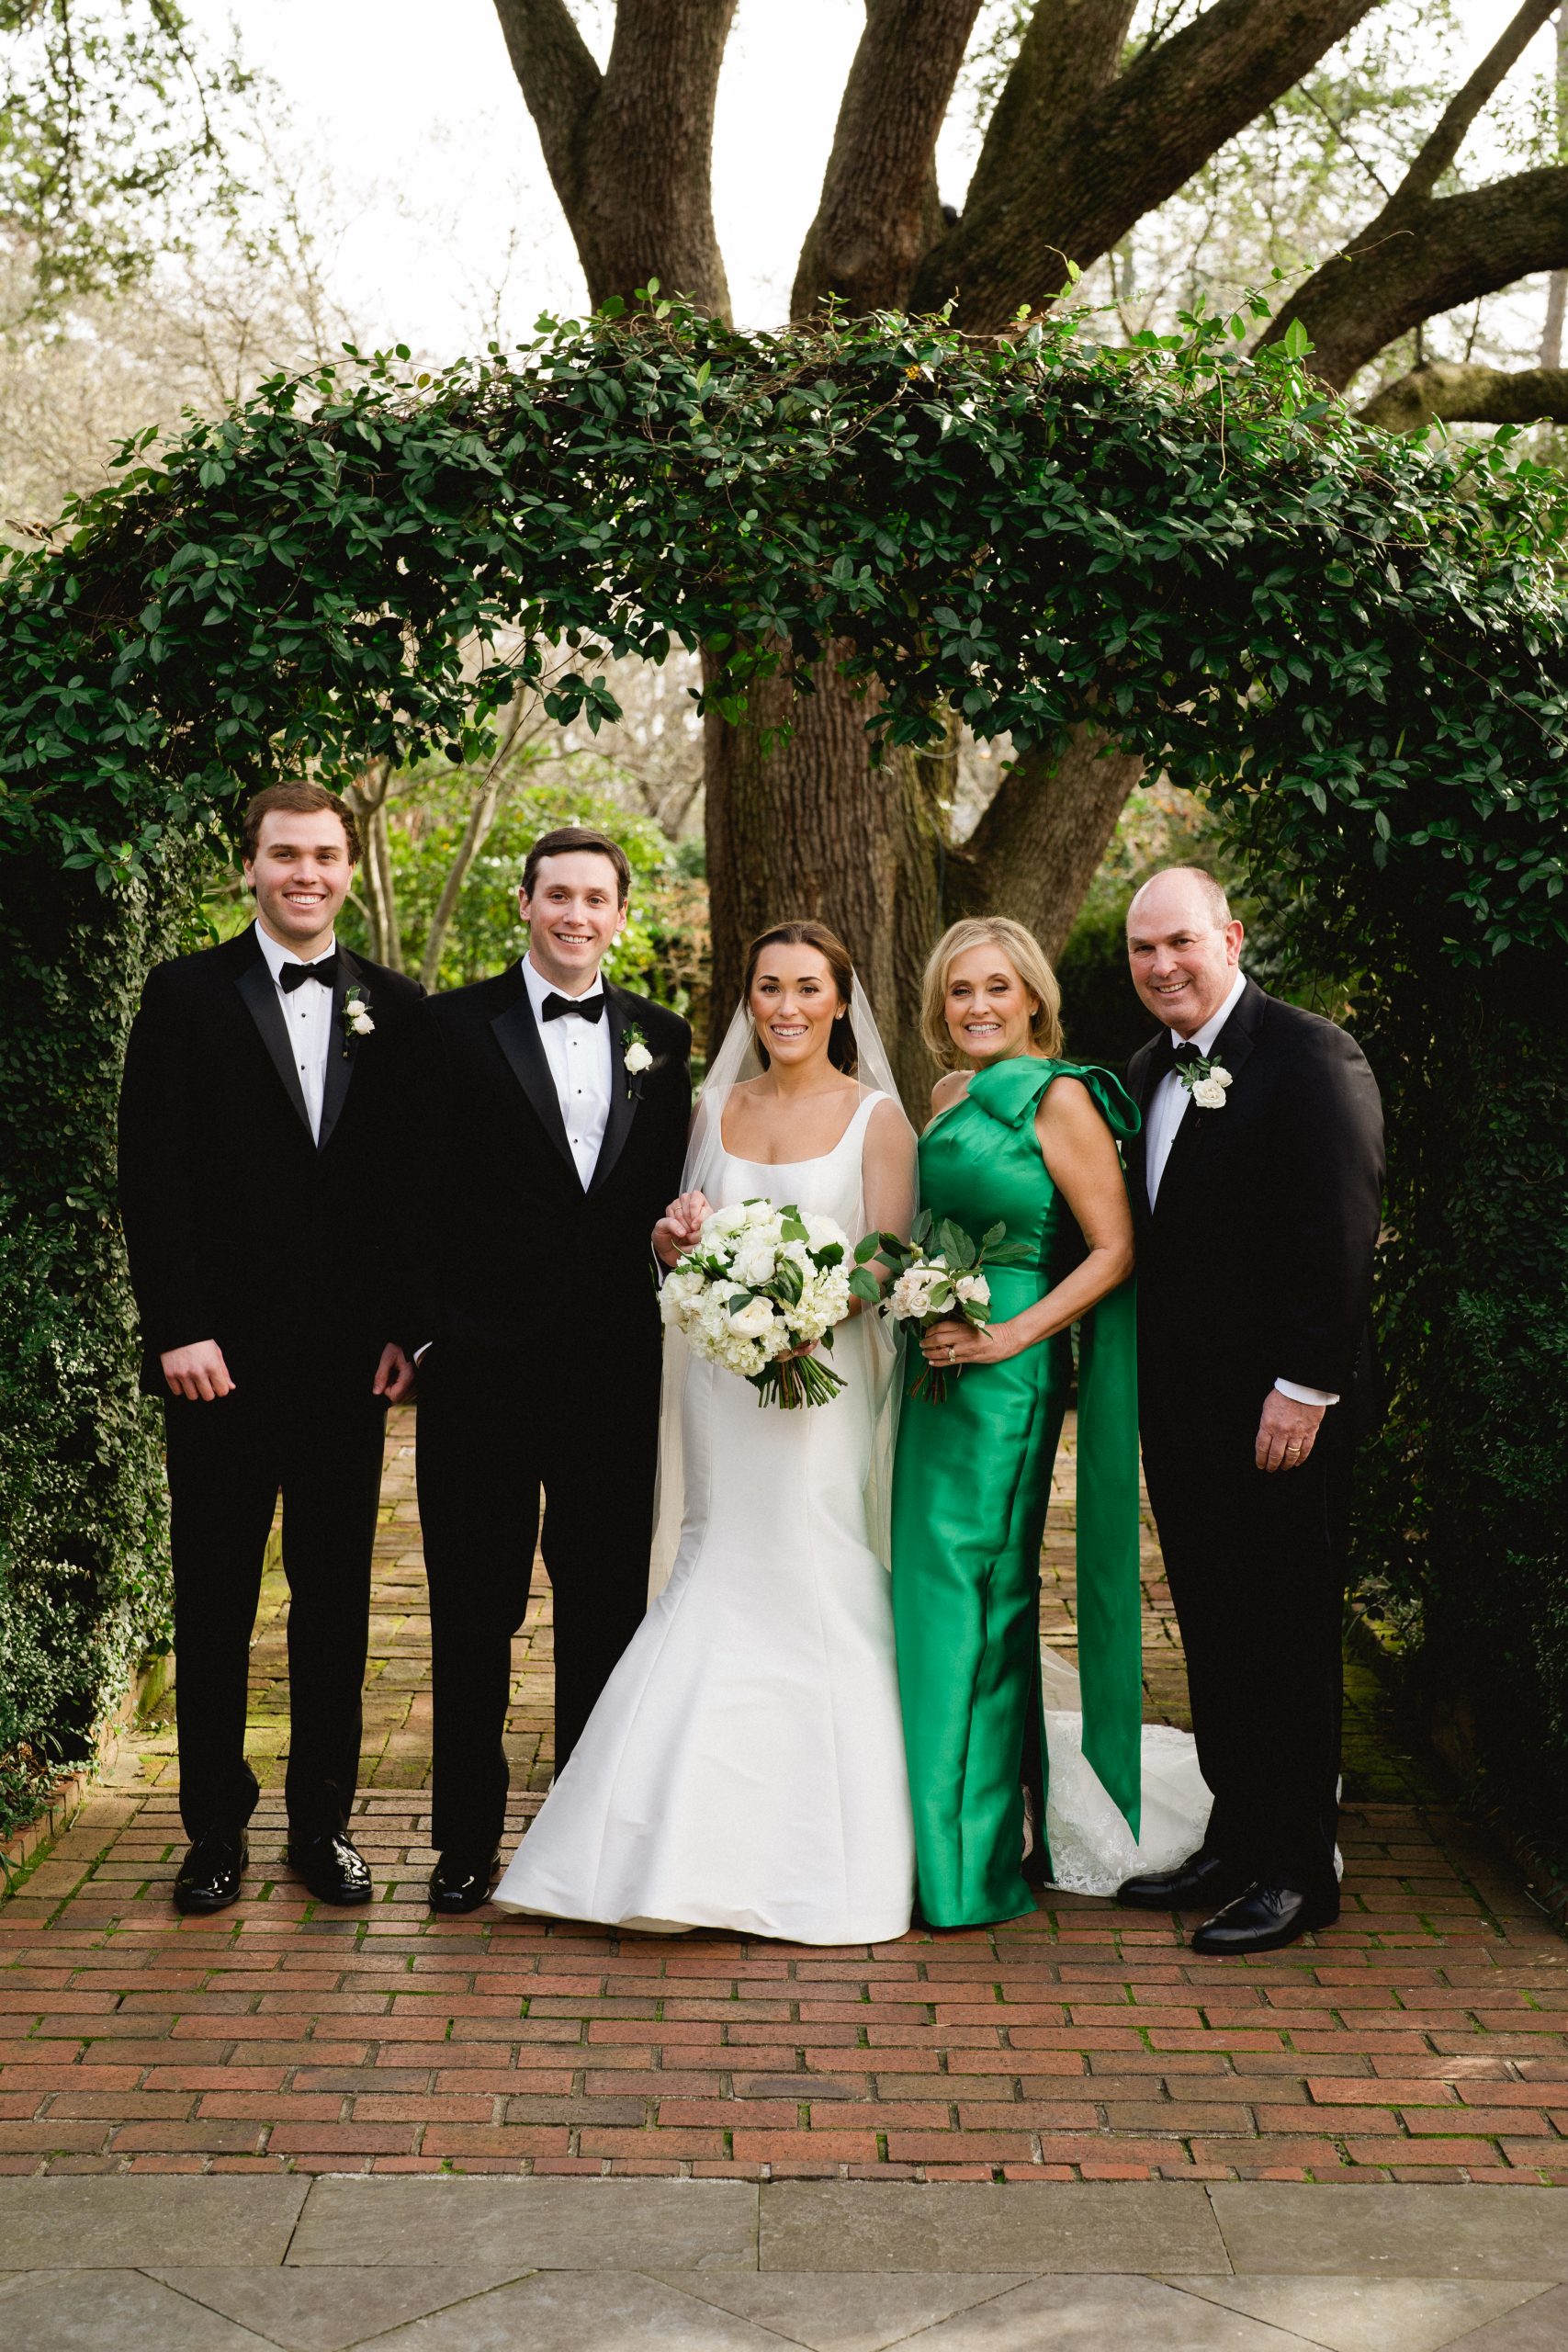 Mimi’s brother, Christopher; Jack and Mimi Collins; and Mimi’s parents, Jan and Chris Marshall. Mimi’s beautiful dress was designed by Sareh Nouri, and her veil was custom-made by Sassi Holdord from London. 
